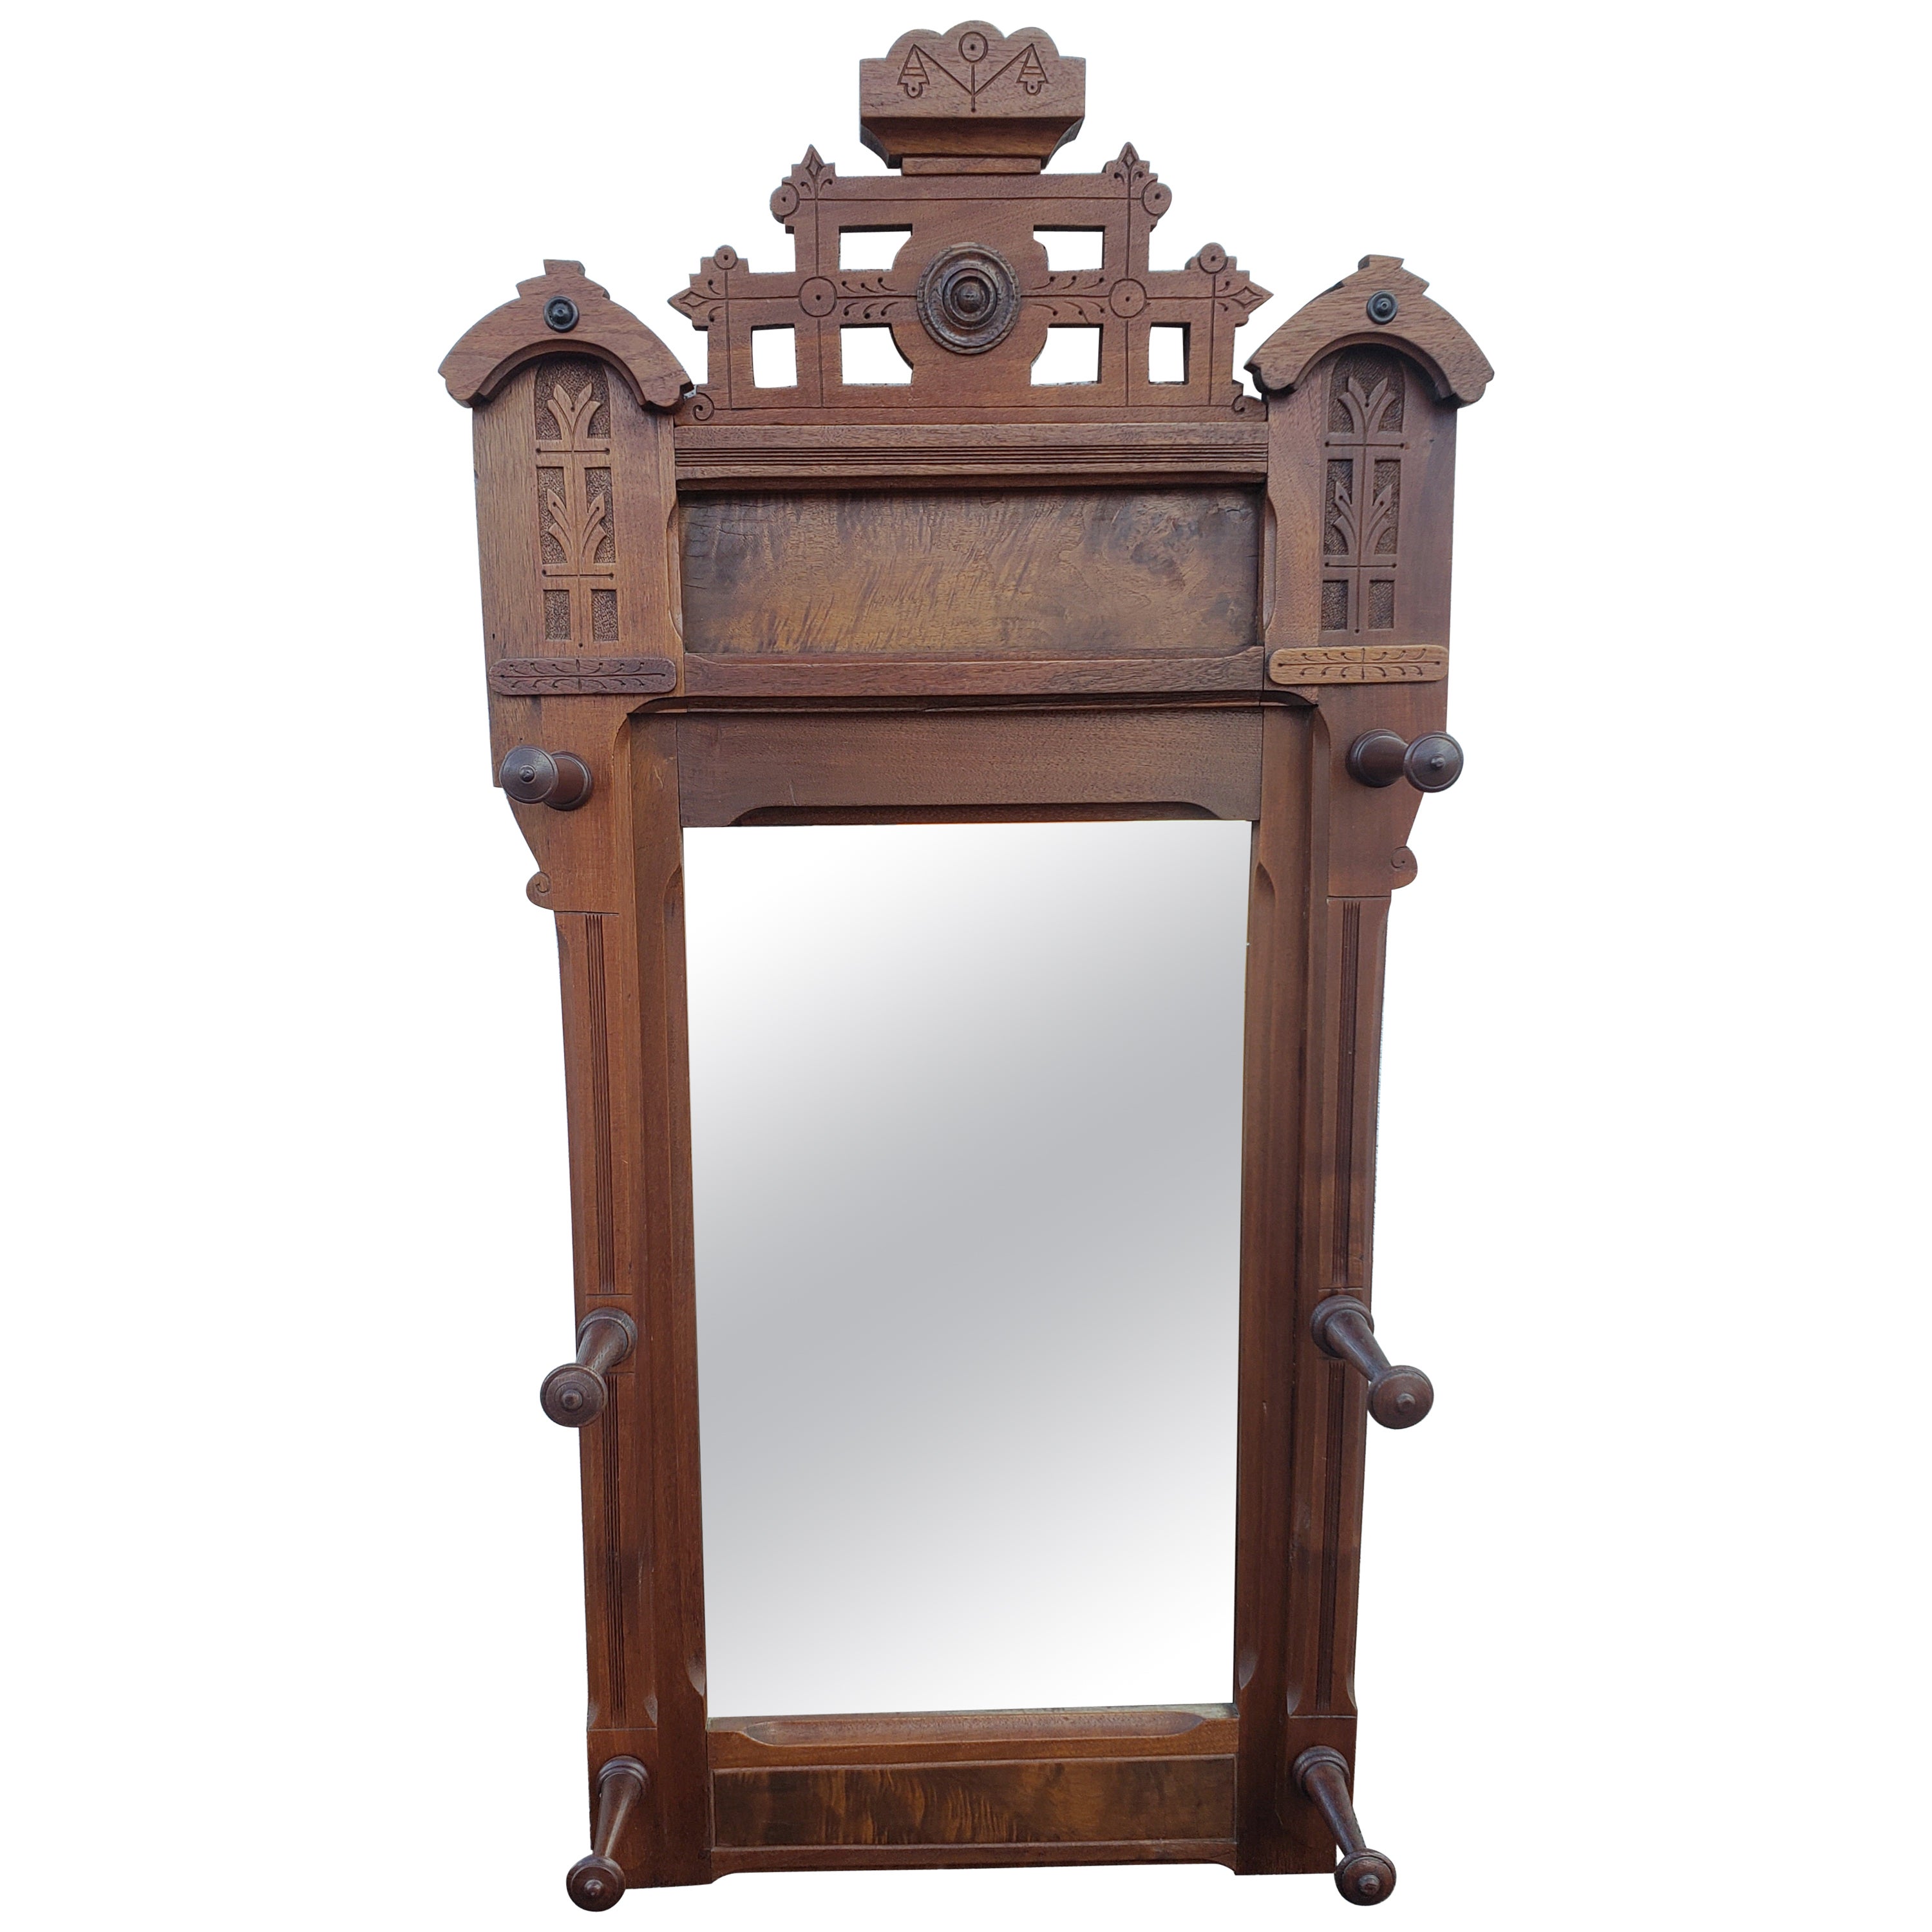  1880s Eastlake Walnut Wall Mirror with Hats Pegs For Sale